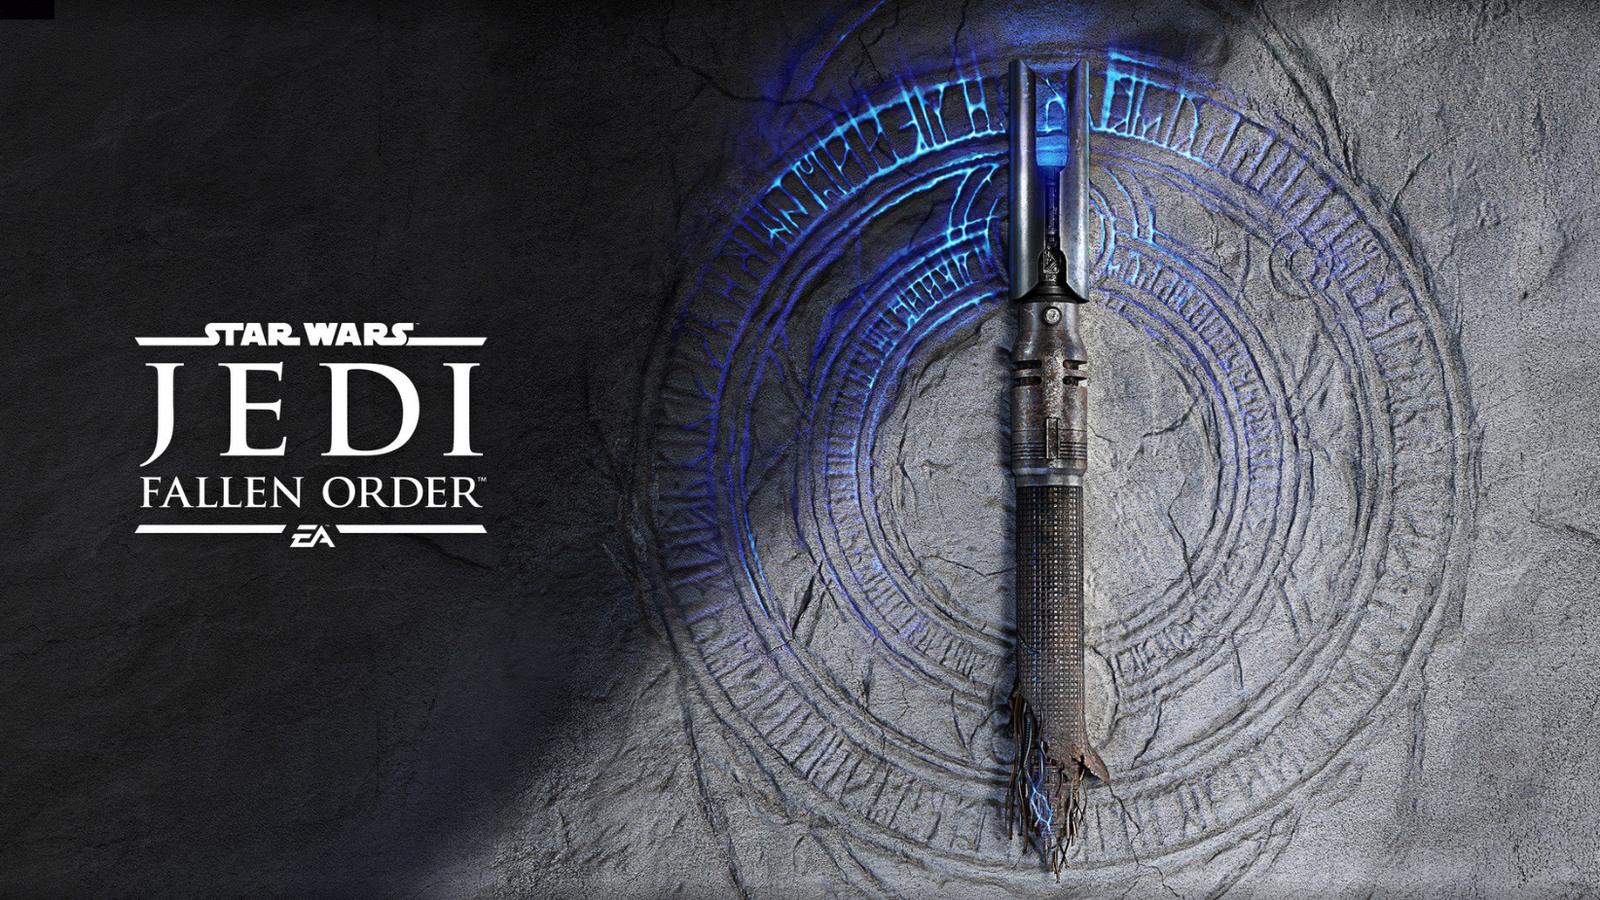 [Rumor] Star Wars Jedi: Fallen Order for PS5 to be released this Friday